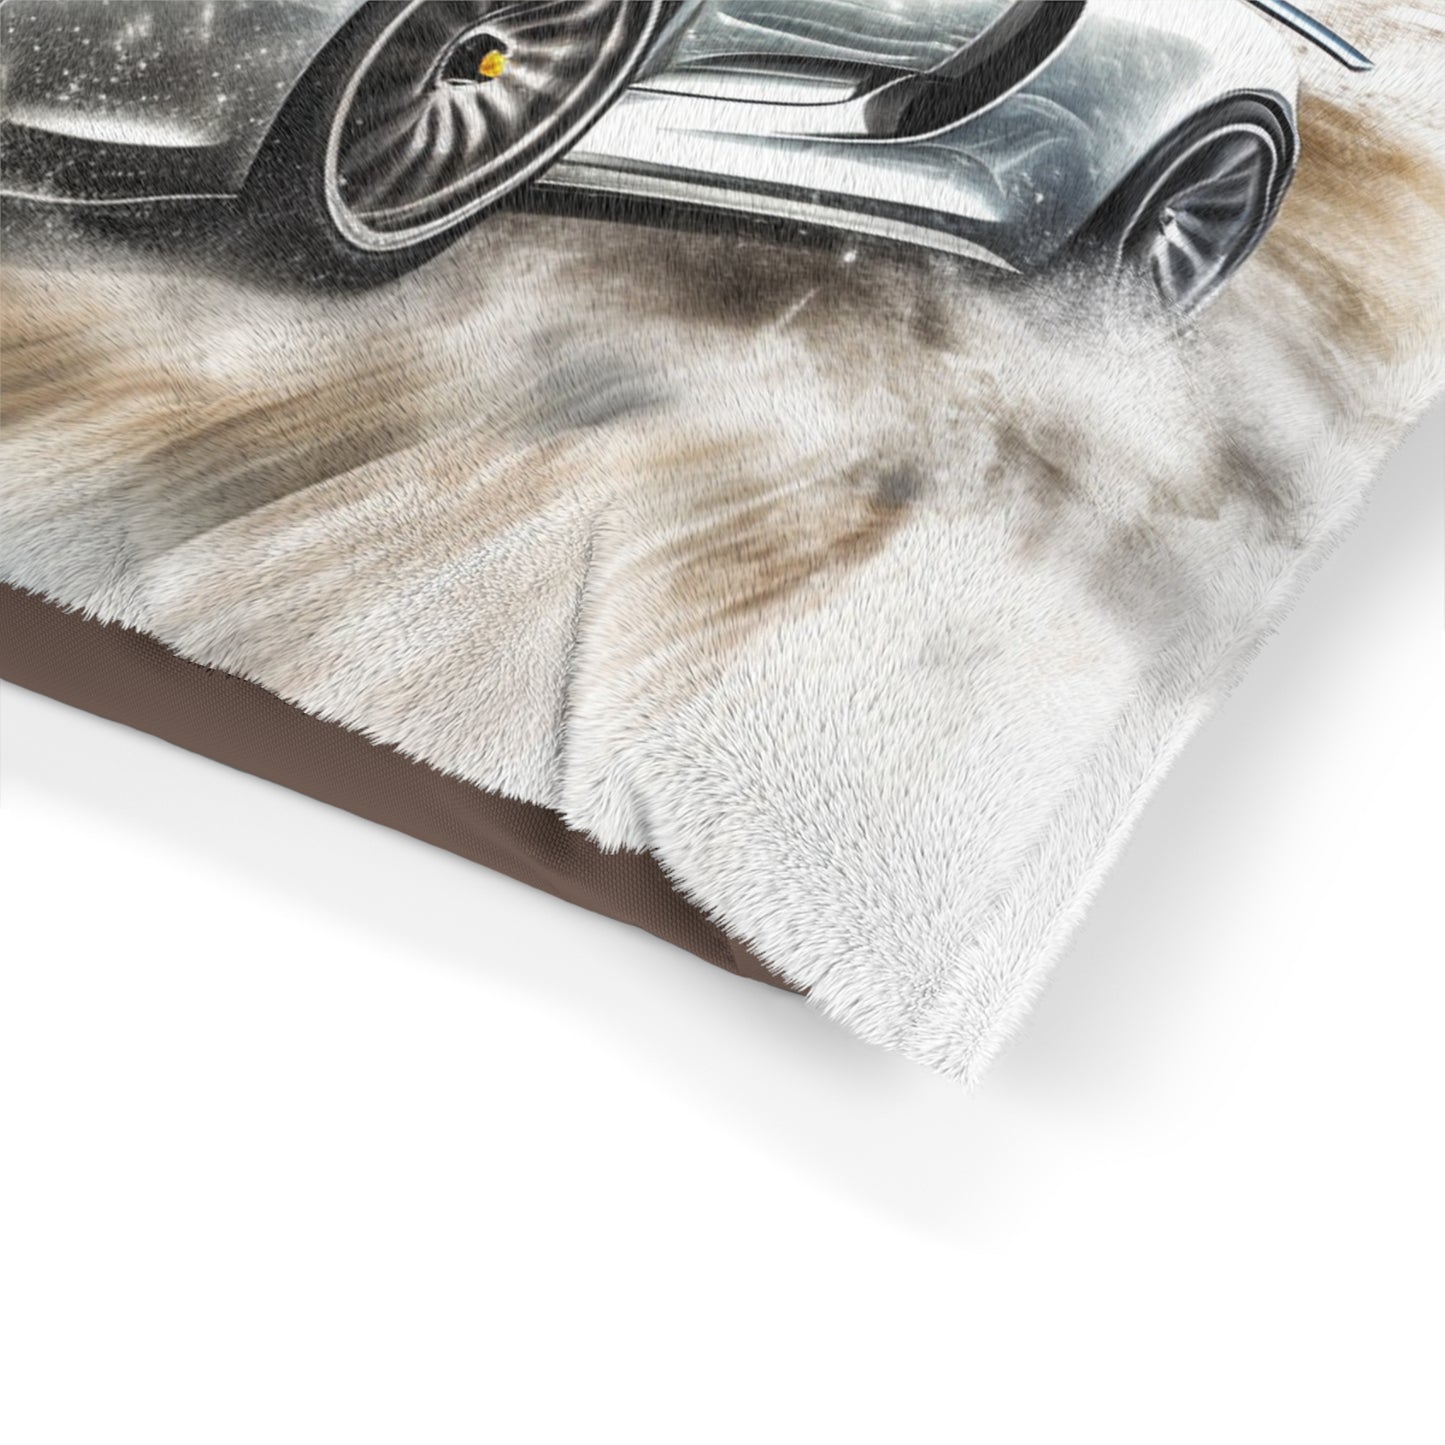 Pet Bed 918 Spyder white background driving fast with water splashing 2